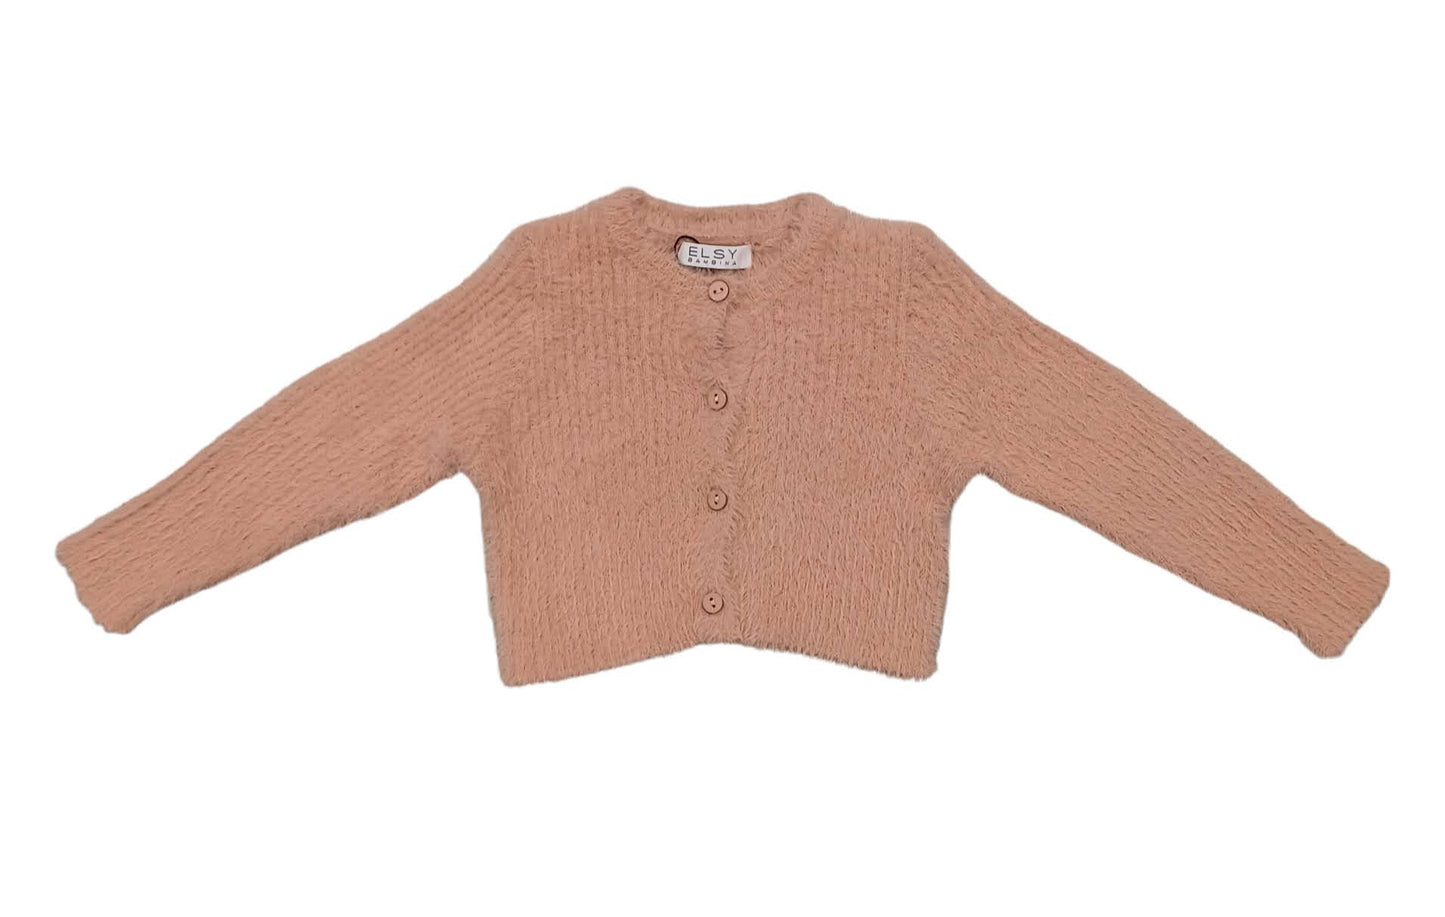 ELSY Baby Short cardigan in powder pink loose knit